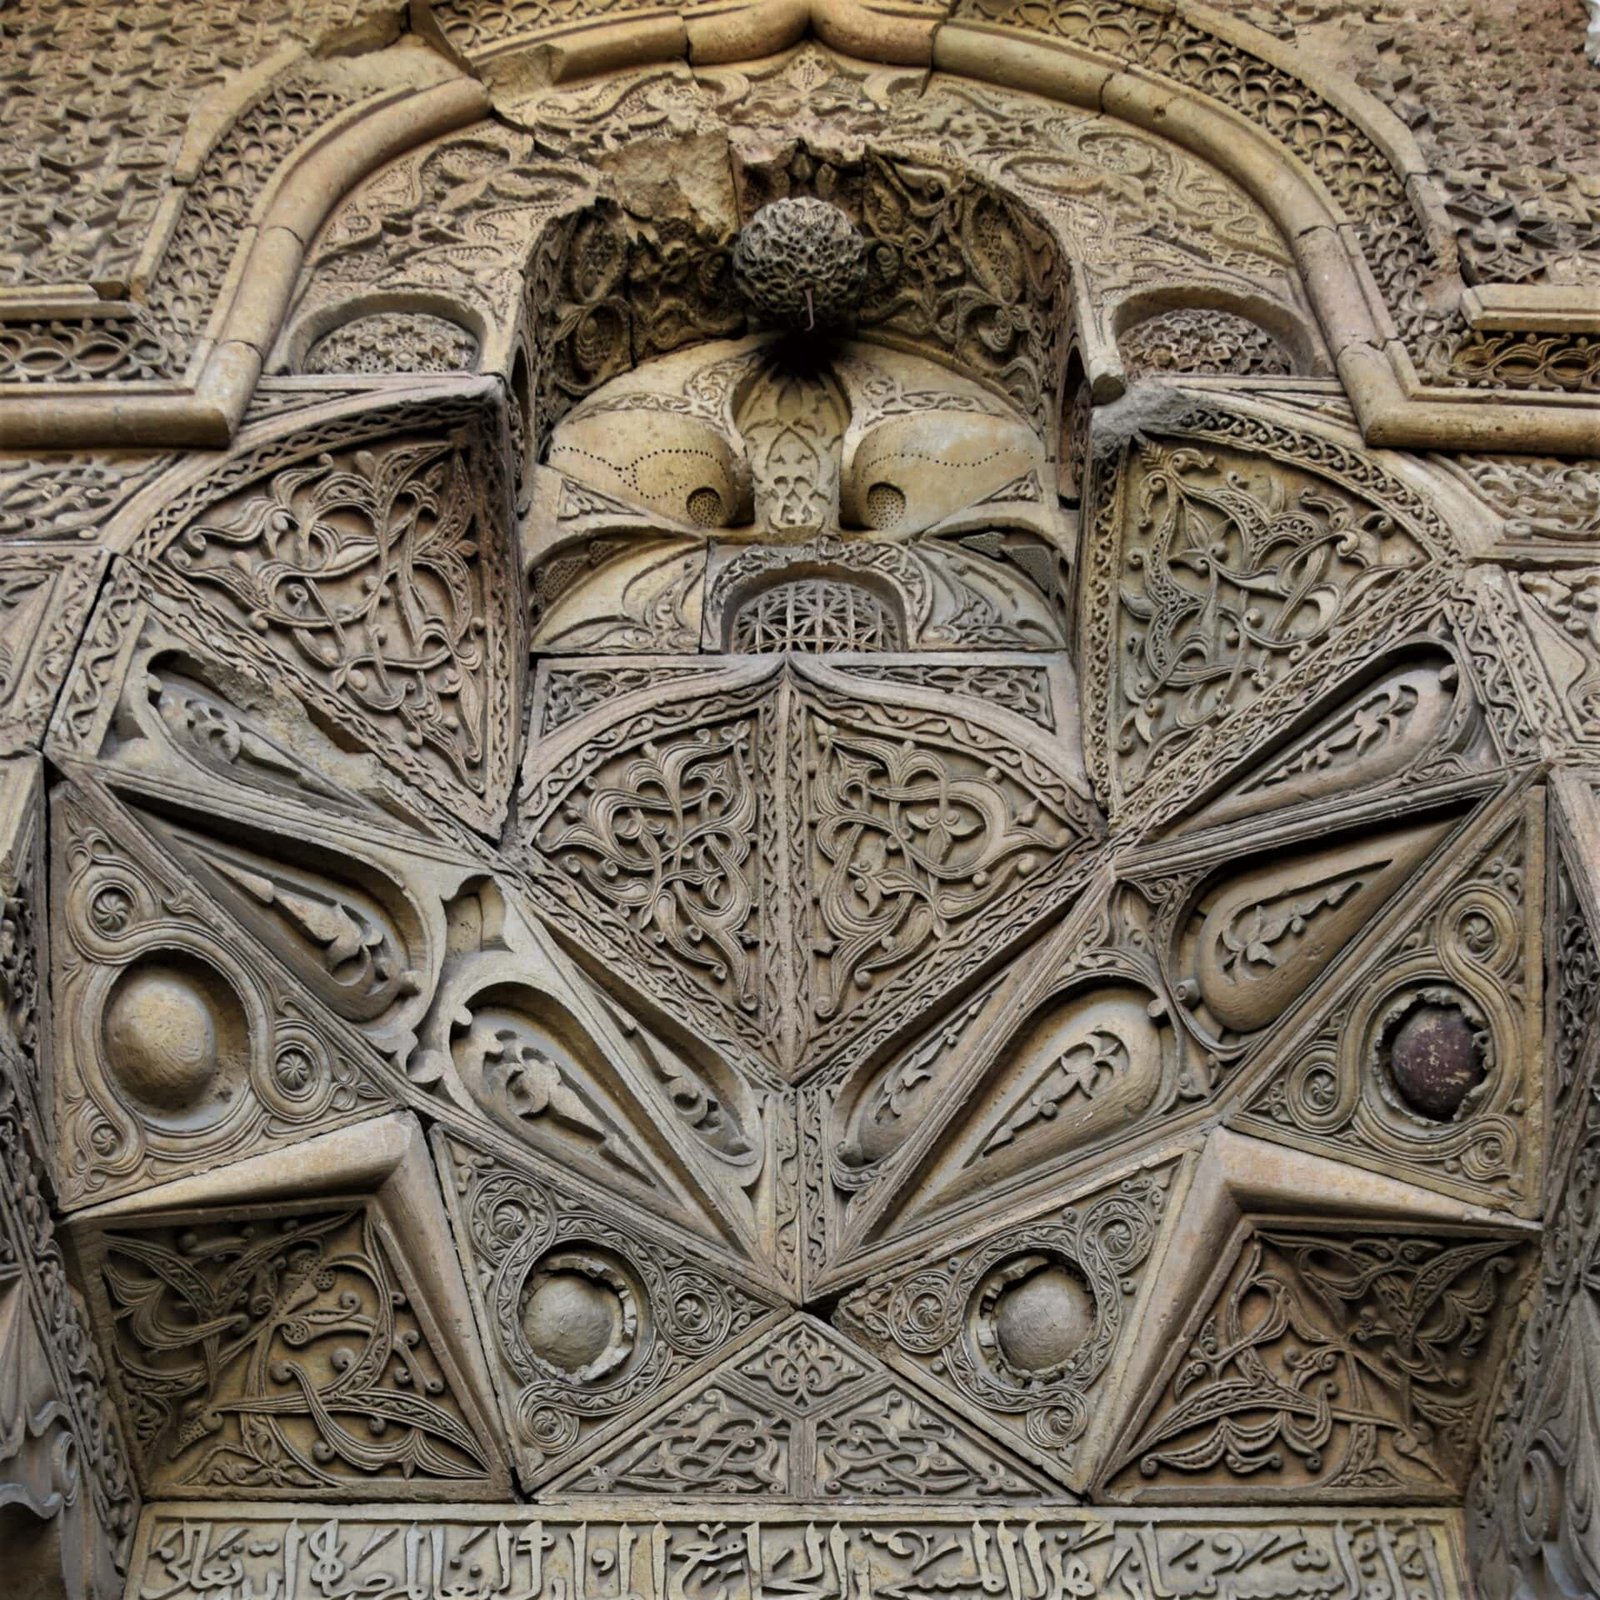 marvellous stone ornaments above a side entrance to the Great Mosque of Divriği